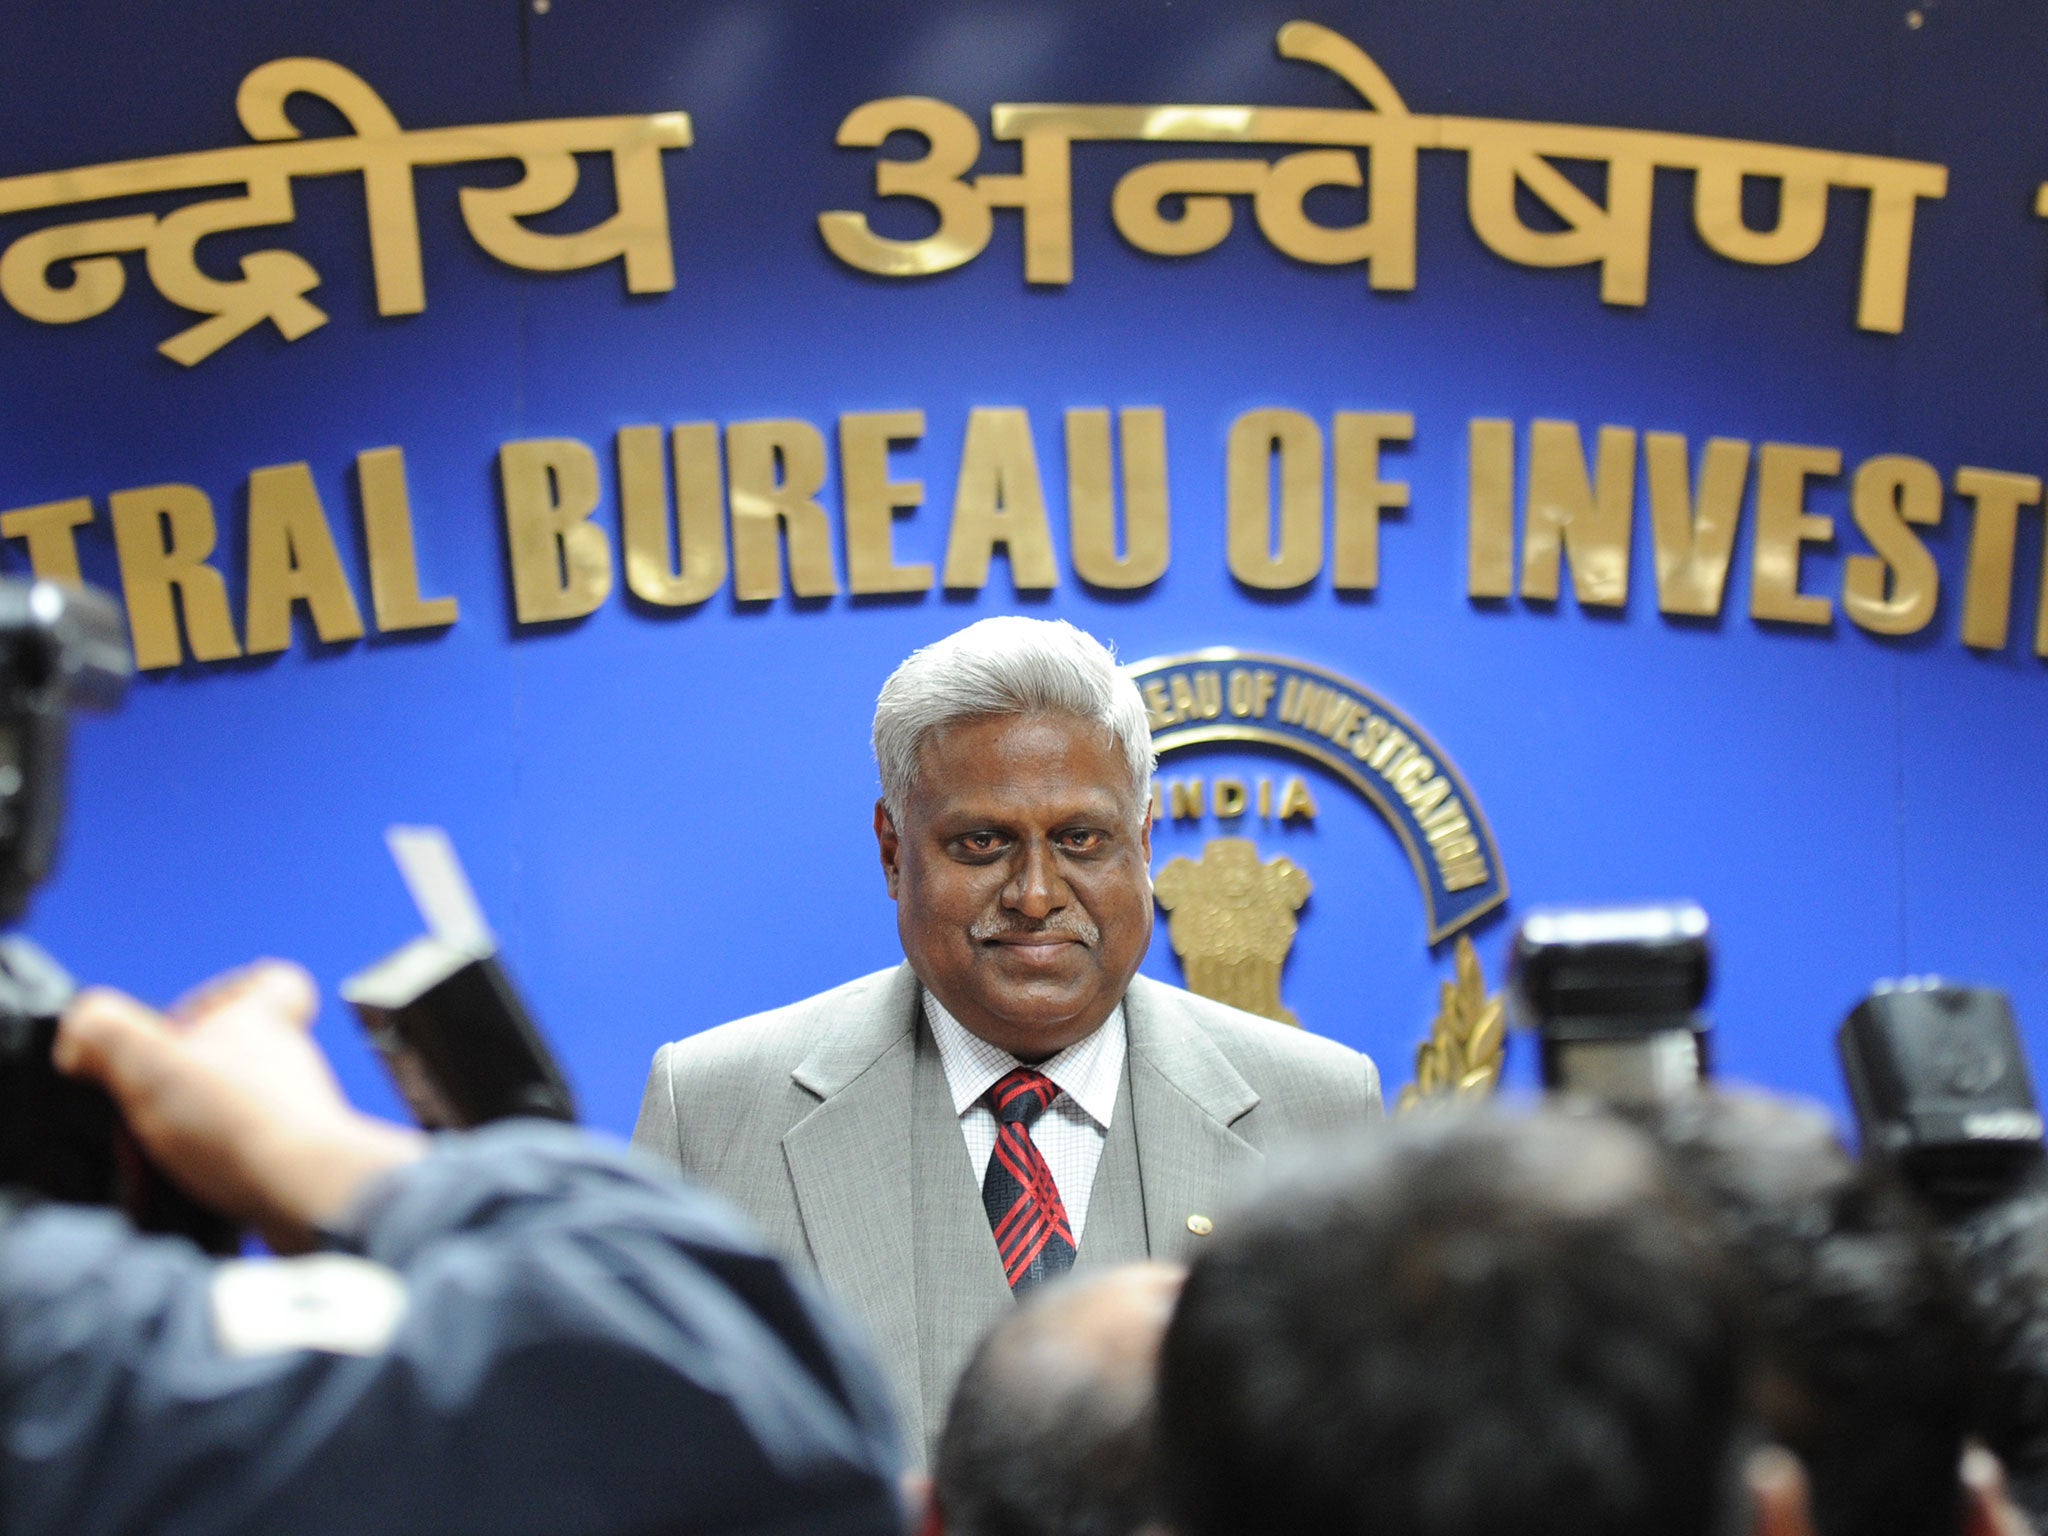 Ranjit Sinha enjoyed an easier relationship with the media when he spoke at CBI headquarters in Delhi following his election as Bureau head in December 2012